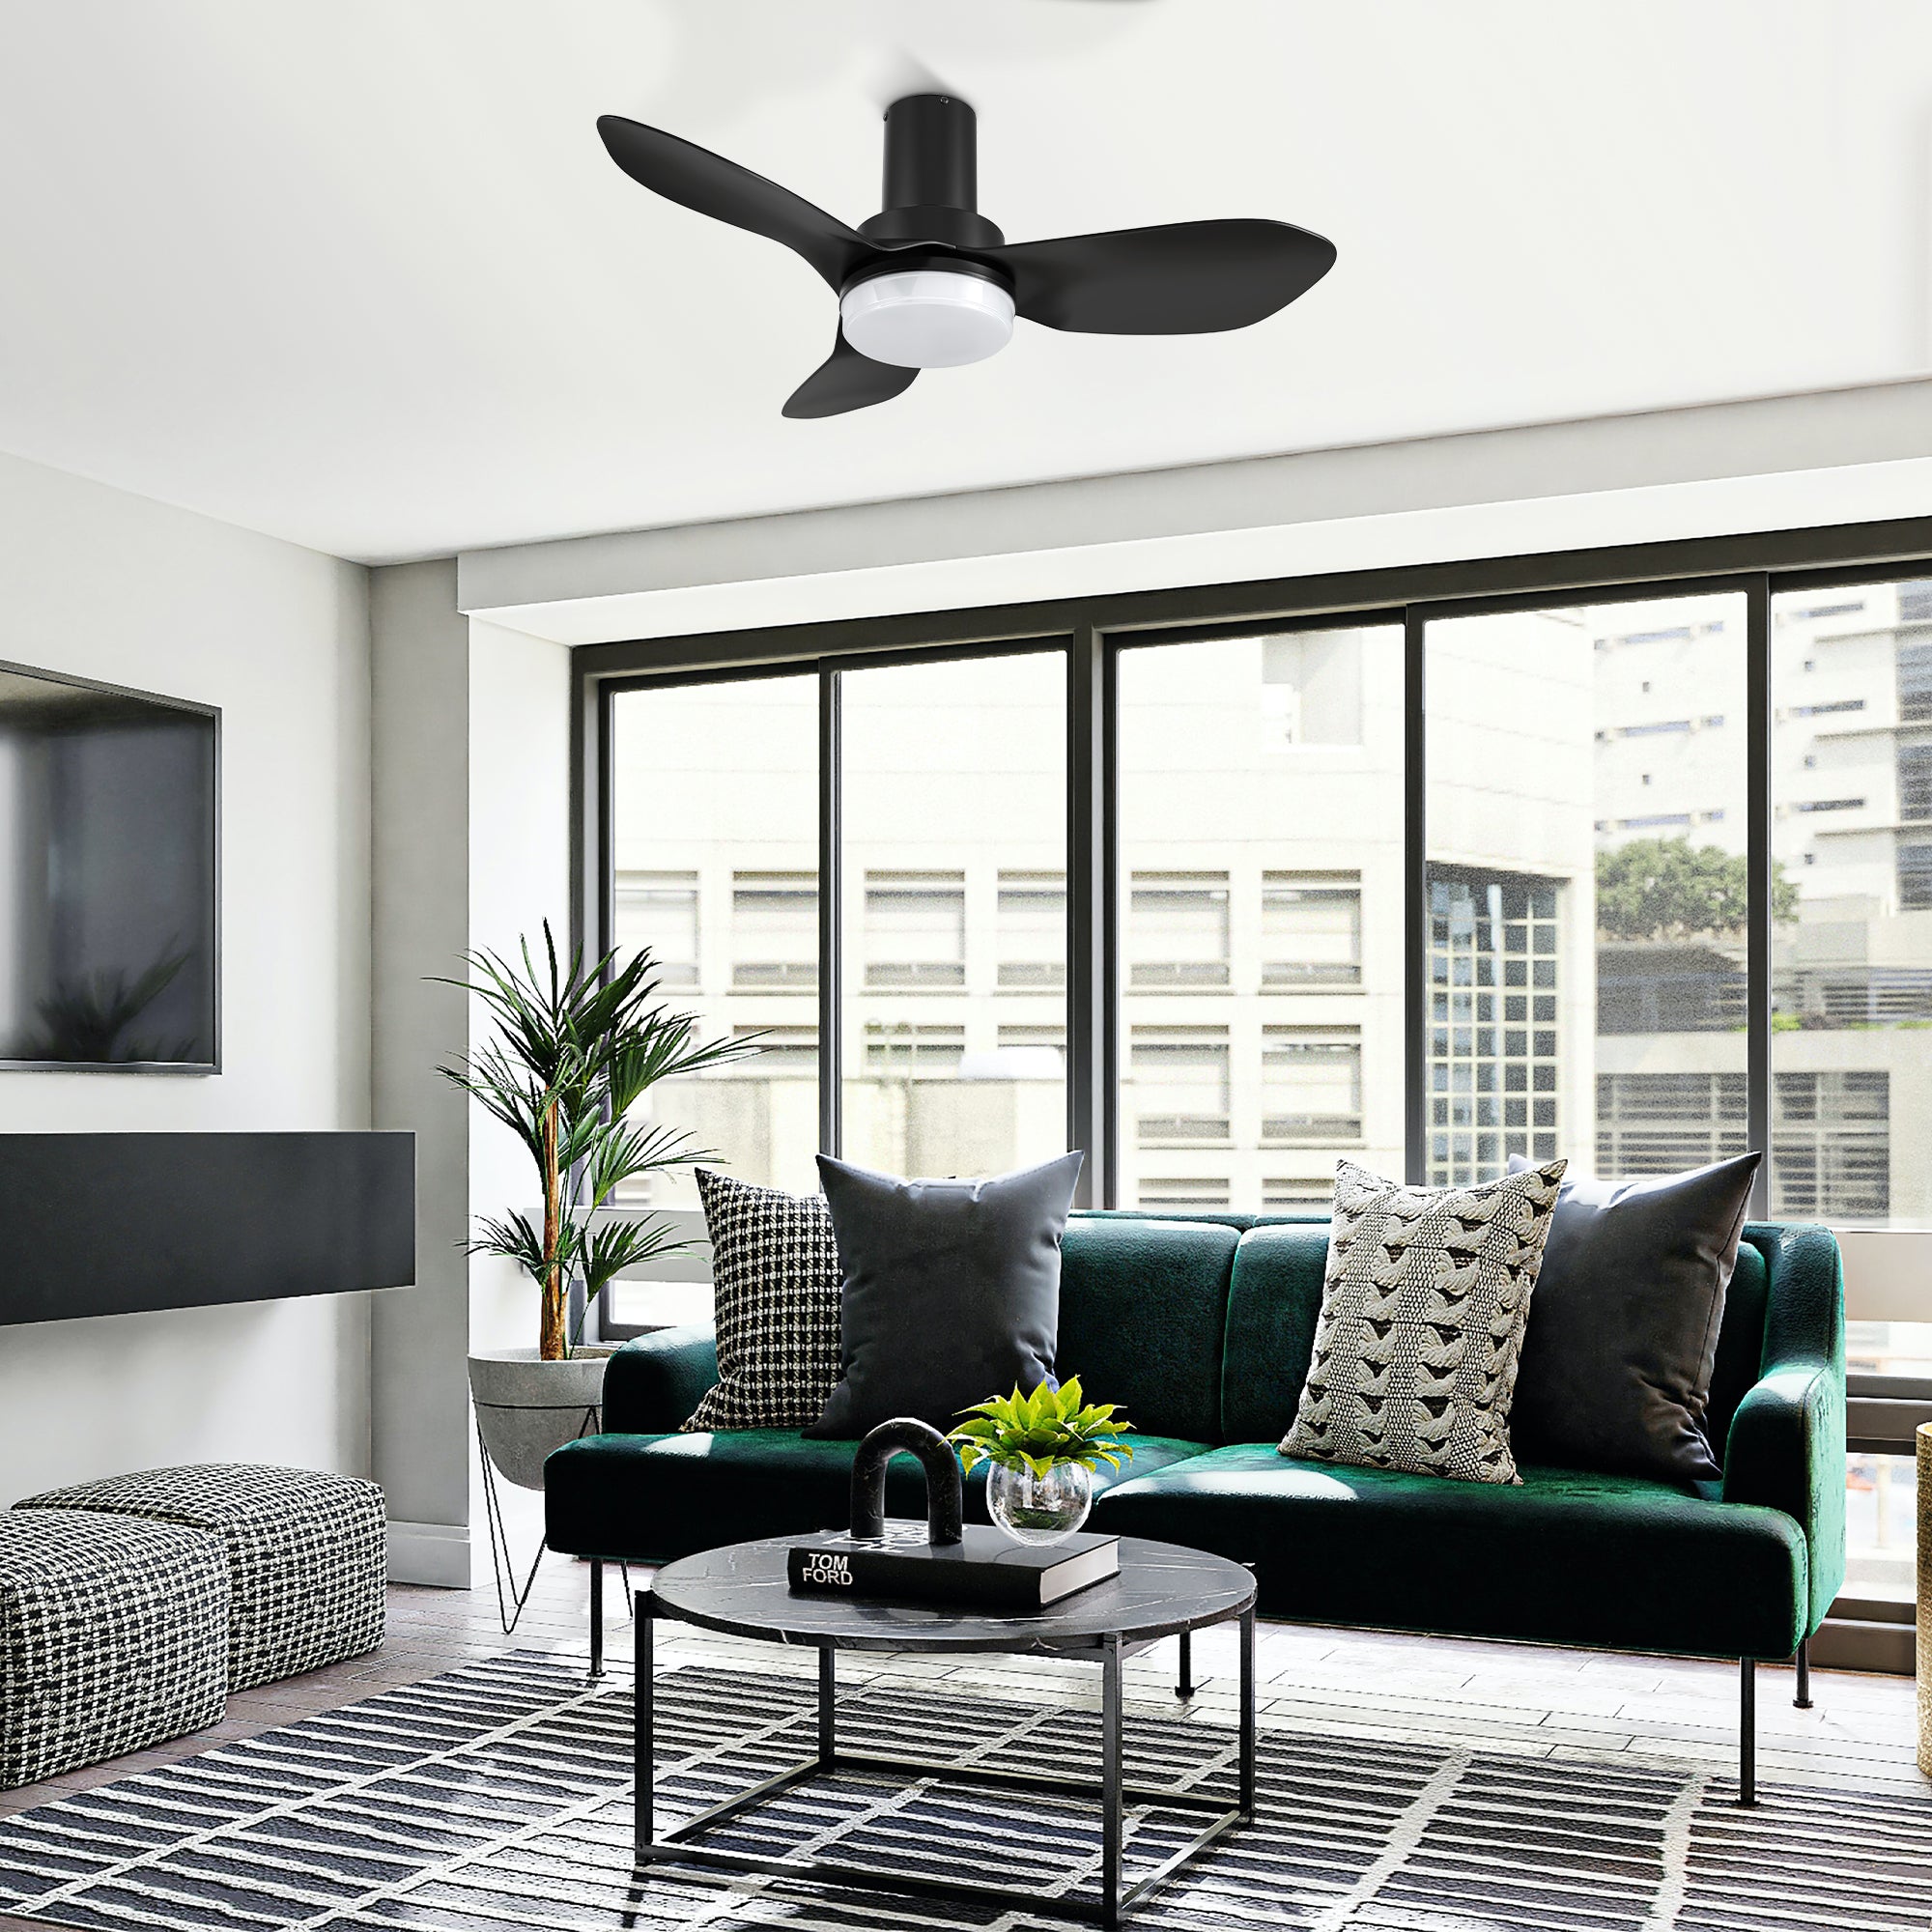 No space is too small for the Nefyn 36/45 inches flush mount ceiling fan! Designed with a compact exterior, a flush mount, an advanced DC motor, and luminous LED lighting. The Nefyn remote control ceiling fan is available in a black or white finish to contrast elegantly or blend seamlessly into the decor of your preference. #color_Black